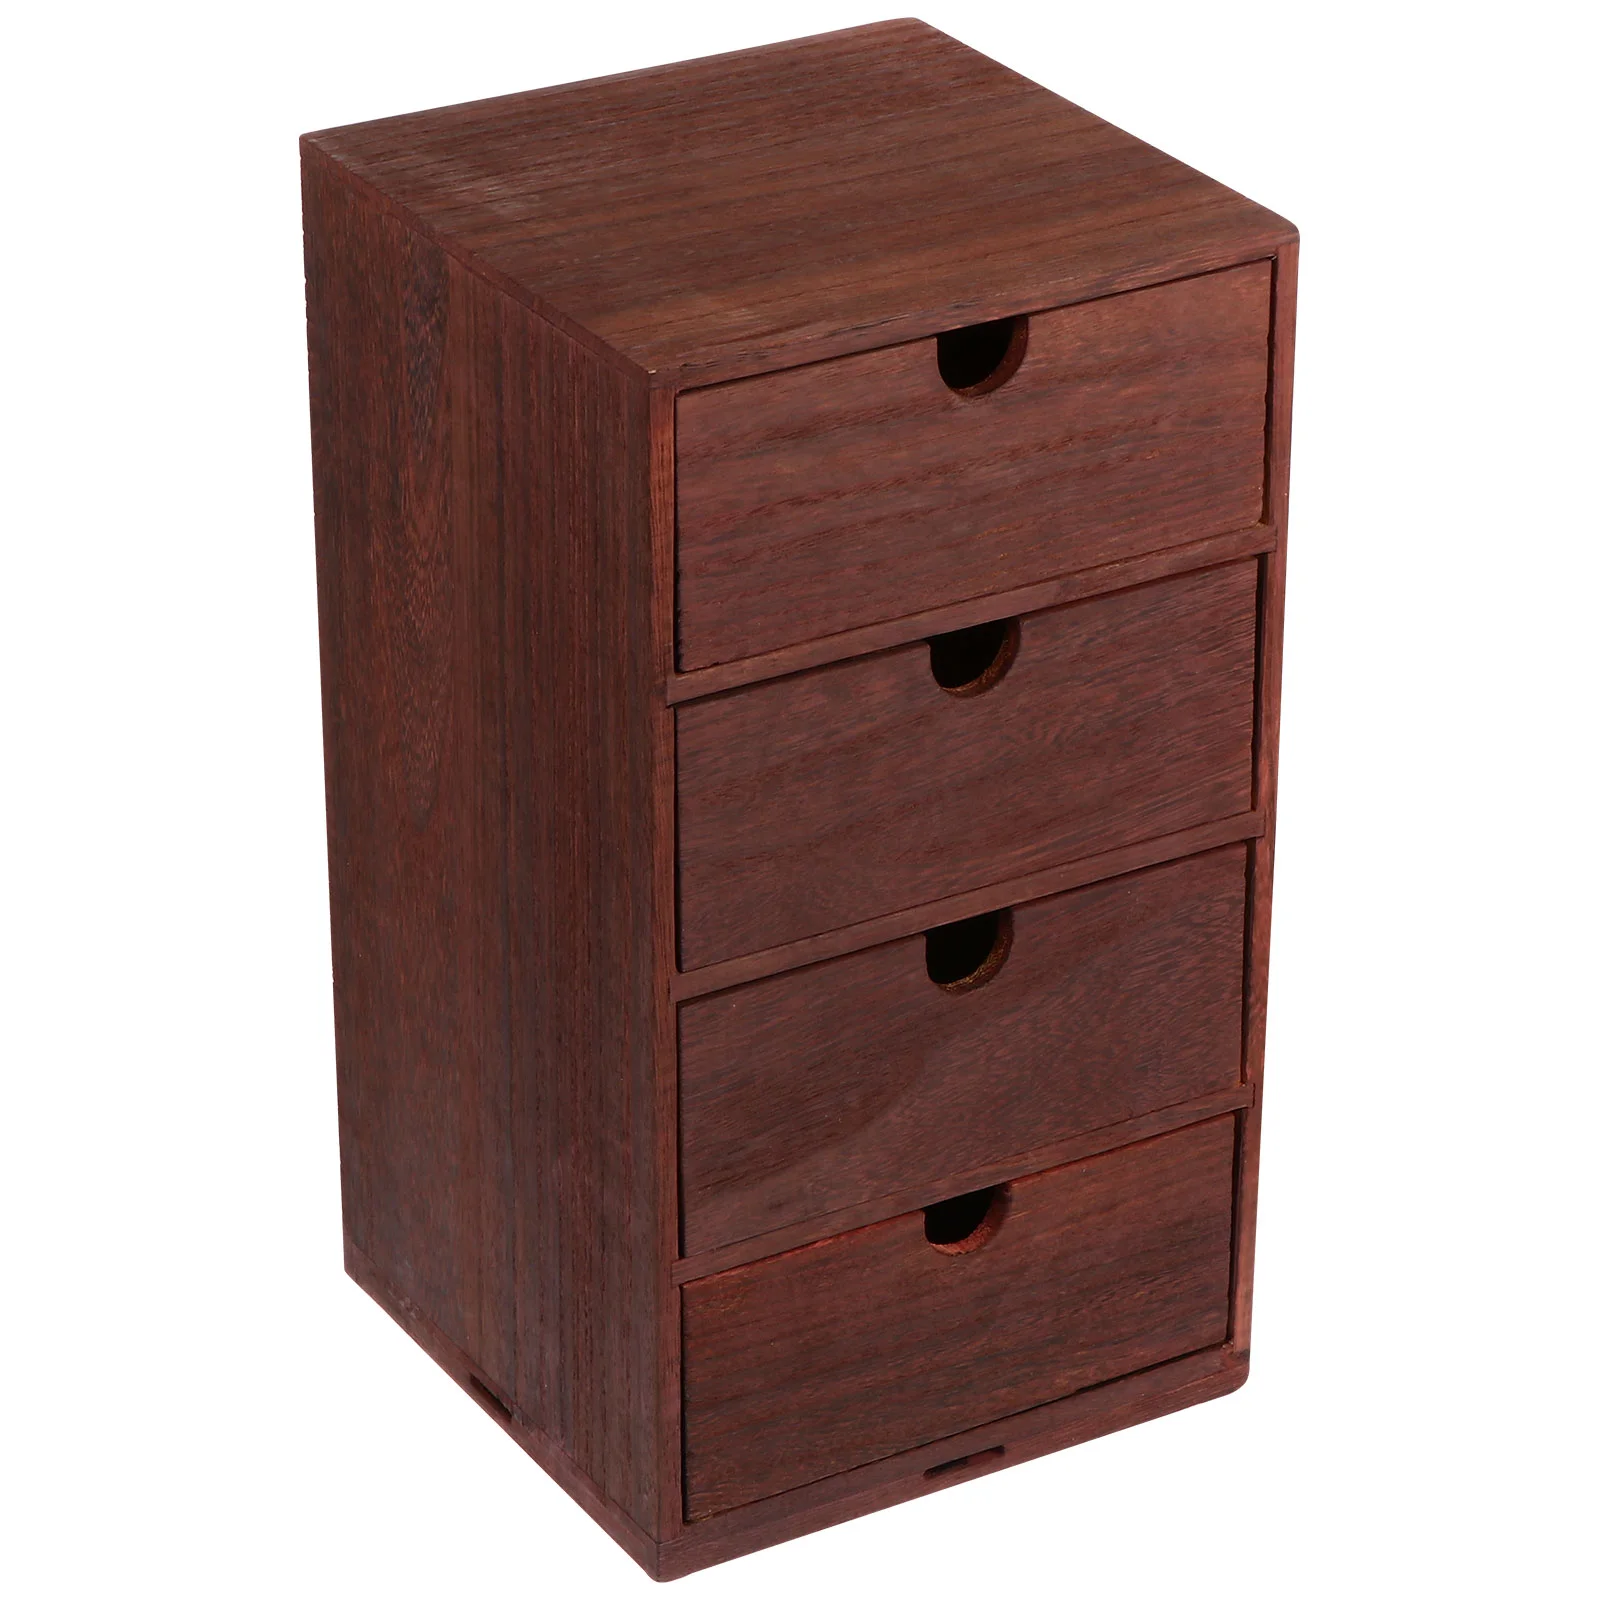 

Drawer Storage Box Desktop Finishing Container Cosmetics Drawers Makeup Cabinet Wooden Office Out Door Decor